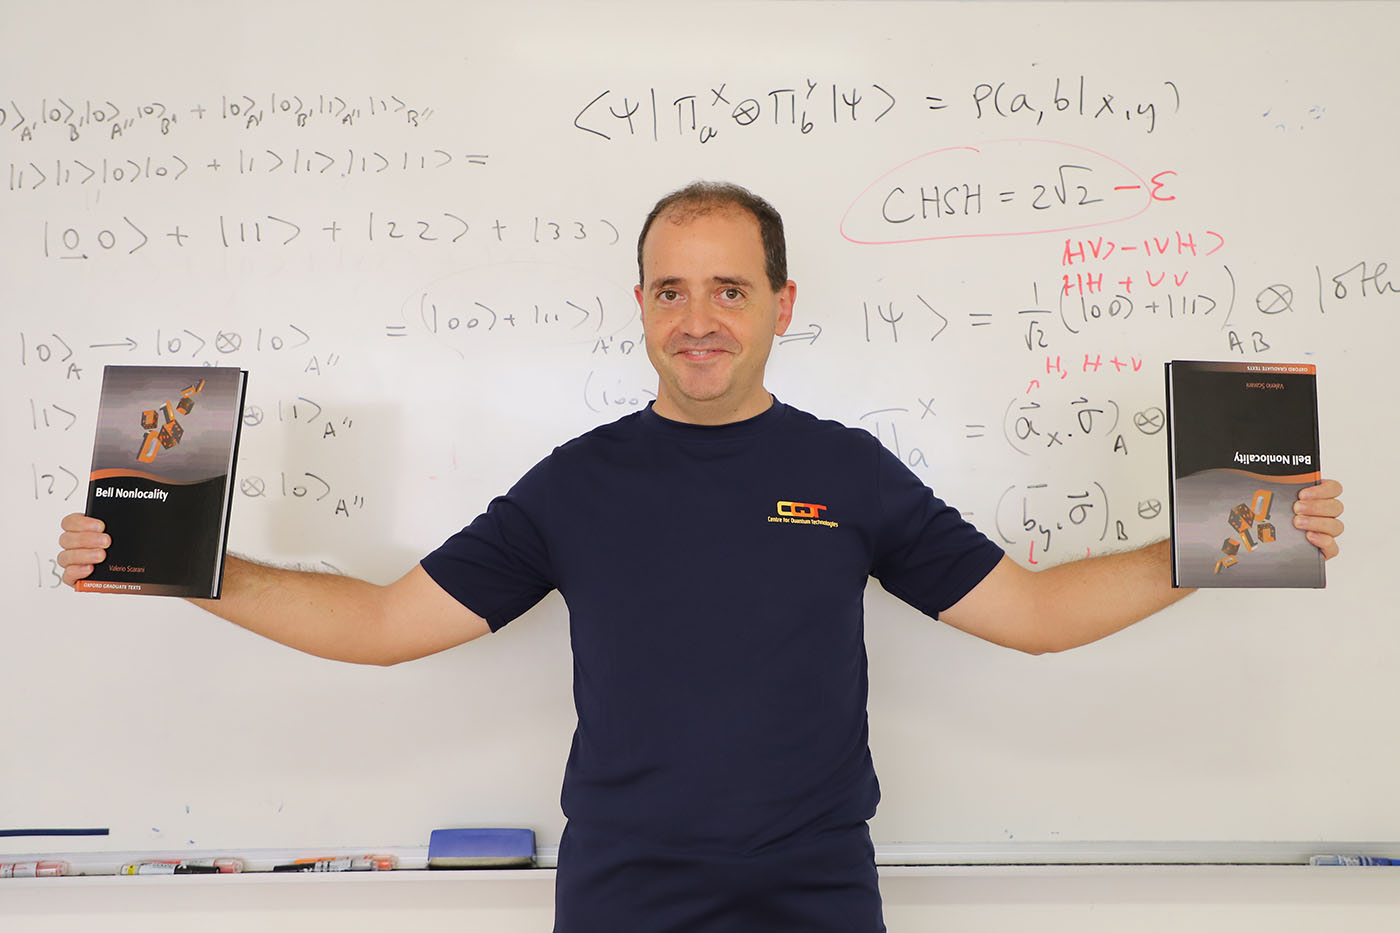 Valerio Scarani with two copies of his book in front of a whiteboard with quantum physics equations